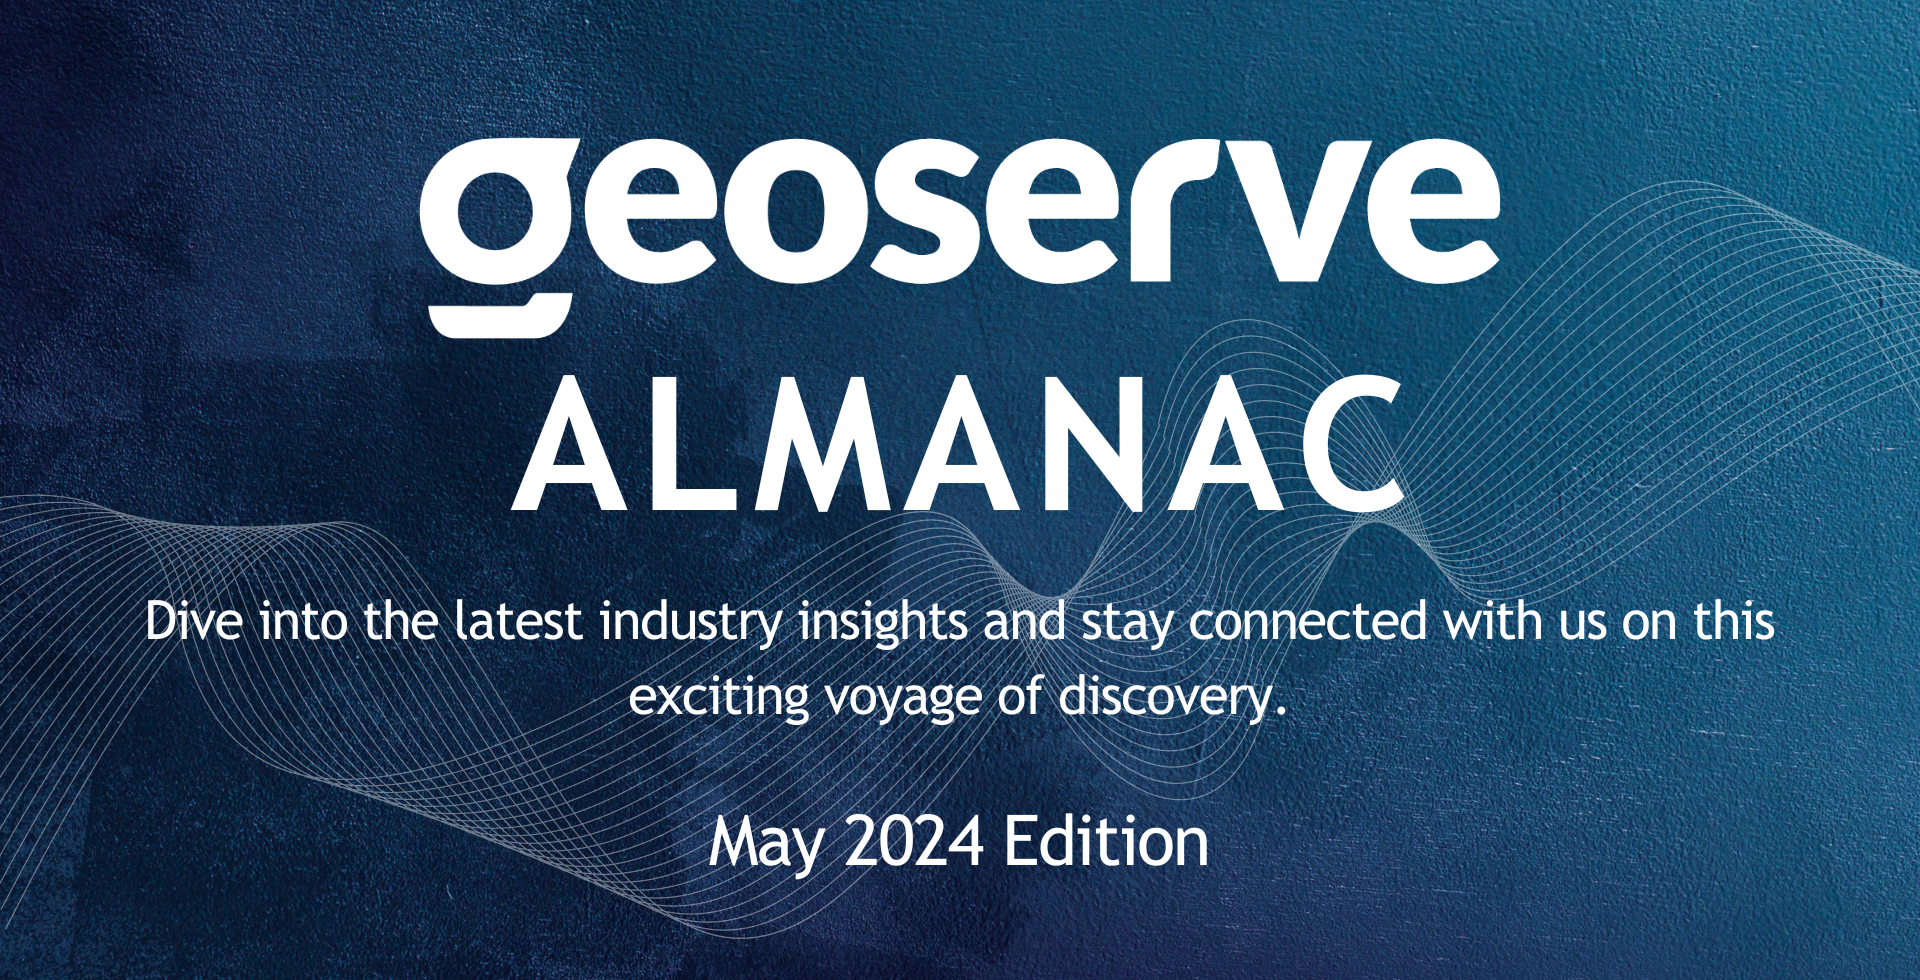 GeoServe Almanac - Monthly Newsletter. Dive into the latest industry insights and stay connected with us on this exciting voyage of discovery.